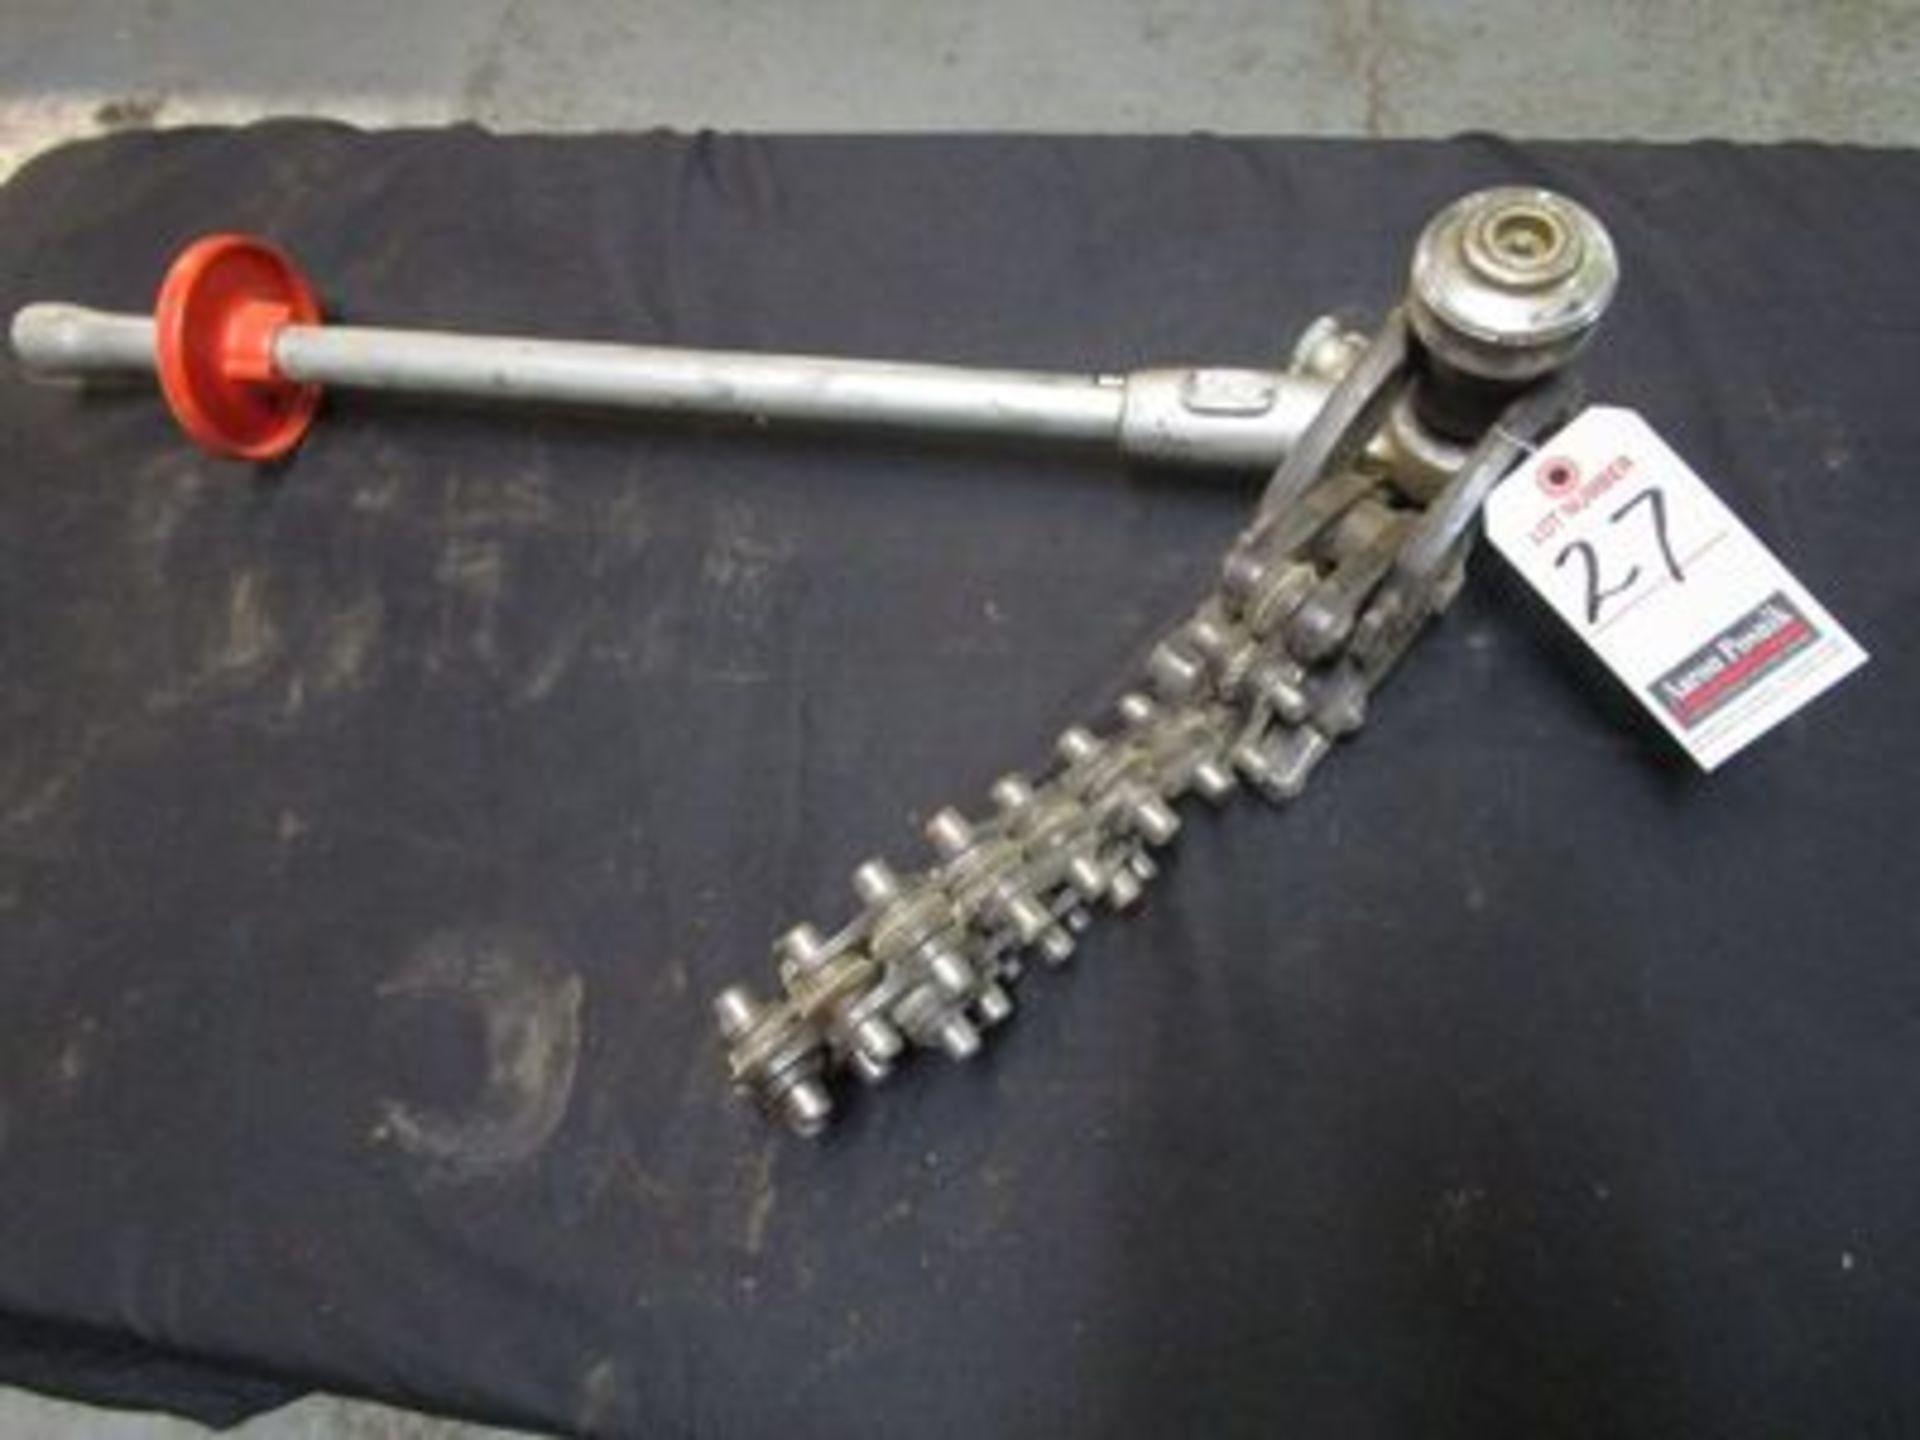 H.D. PORT. CHAIN PIPE VISE